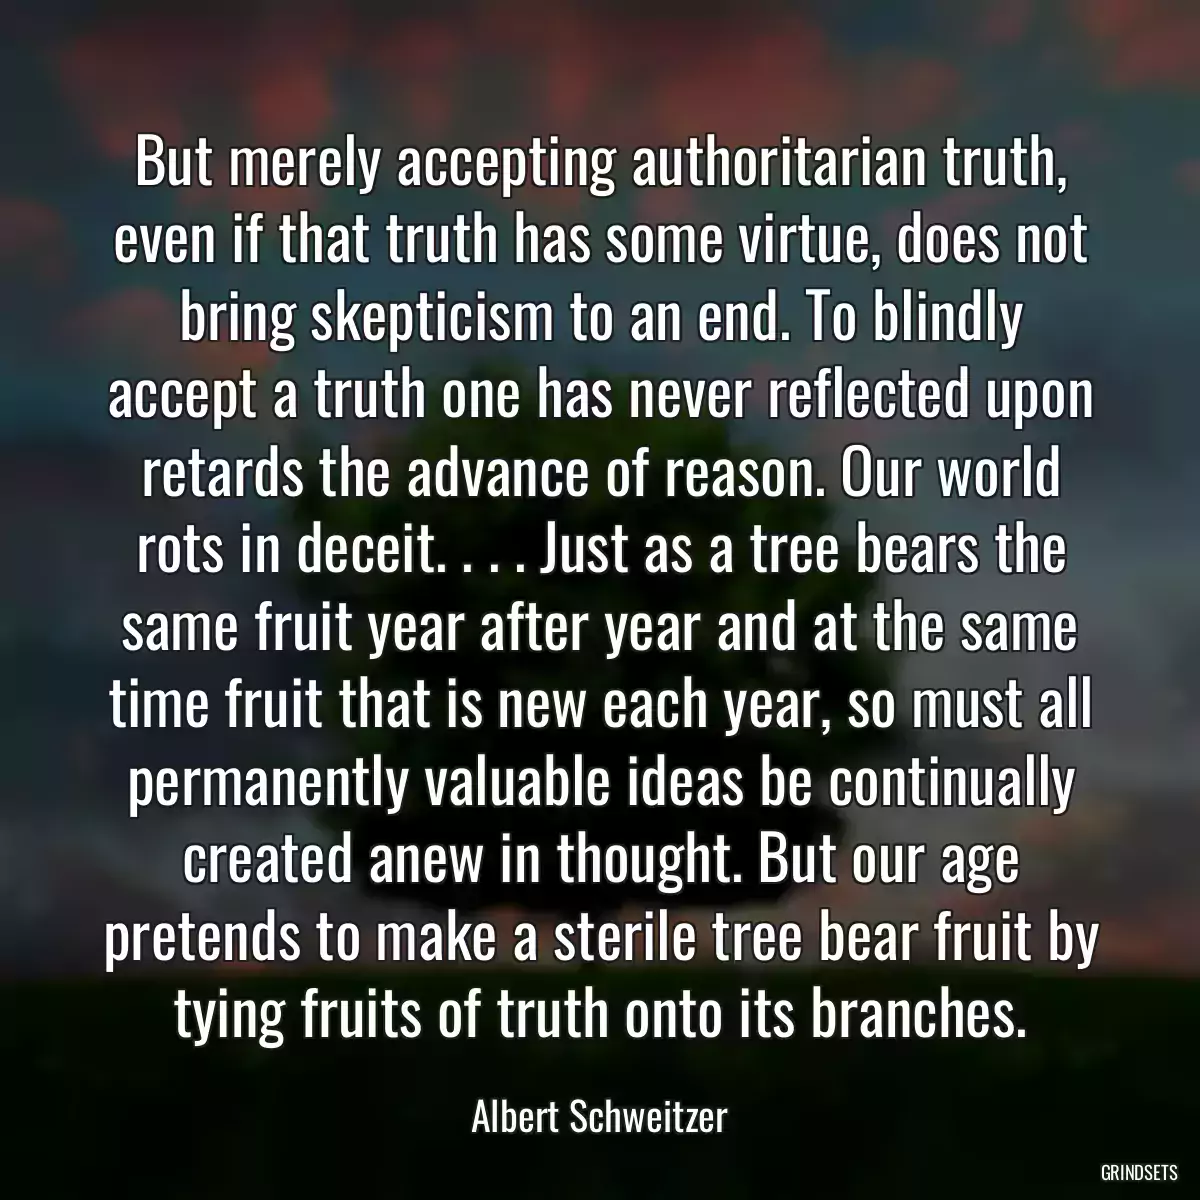 But merely accepting authoritarian truth, even if that truth has some virtue, does not bring skepticism to an end. To blindly accept a truth one has never reflected upon retards the advance of reason. Our world rots in deceit. . . . Just as a tree bears the same fruit year after year and at the same time fruit that is new each year, so must all permanently valuable ideas be continually created anew in thought. But our age pretends to make a sterile tree bear fruit by tying fruits of truth onto its branches.